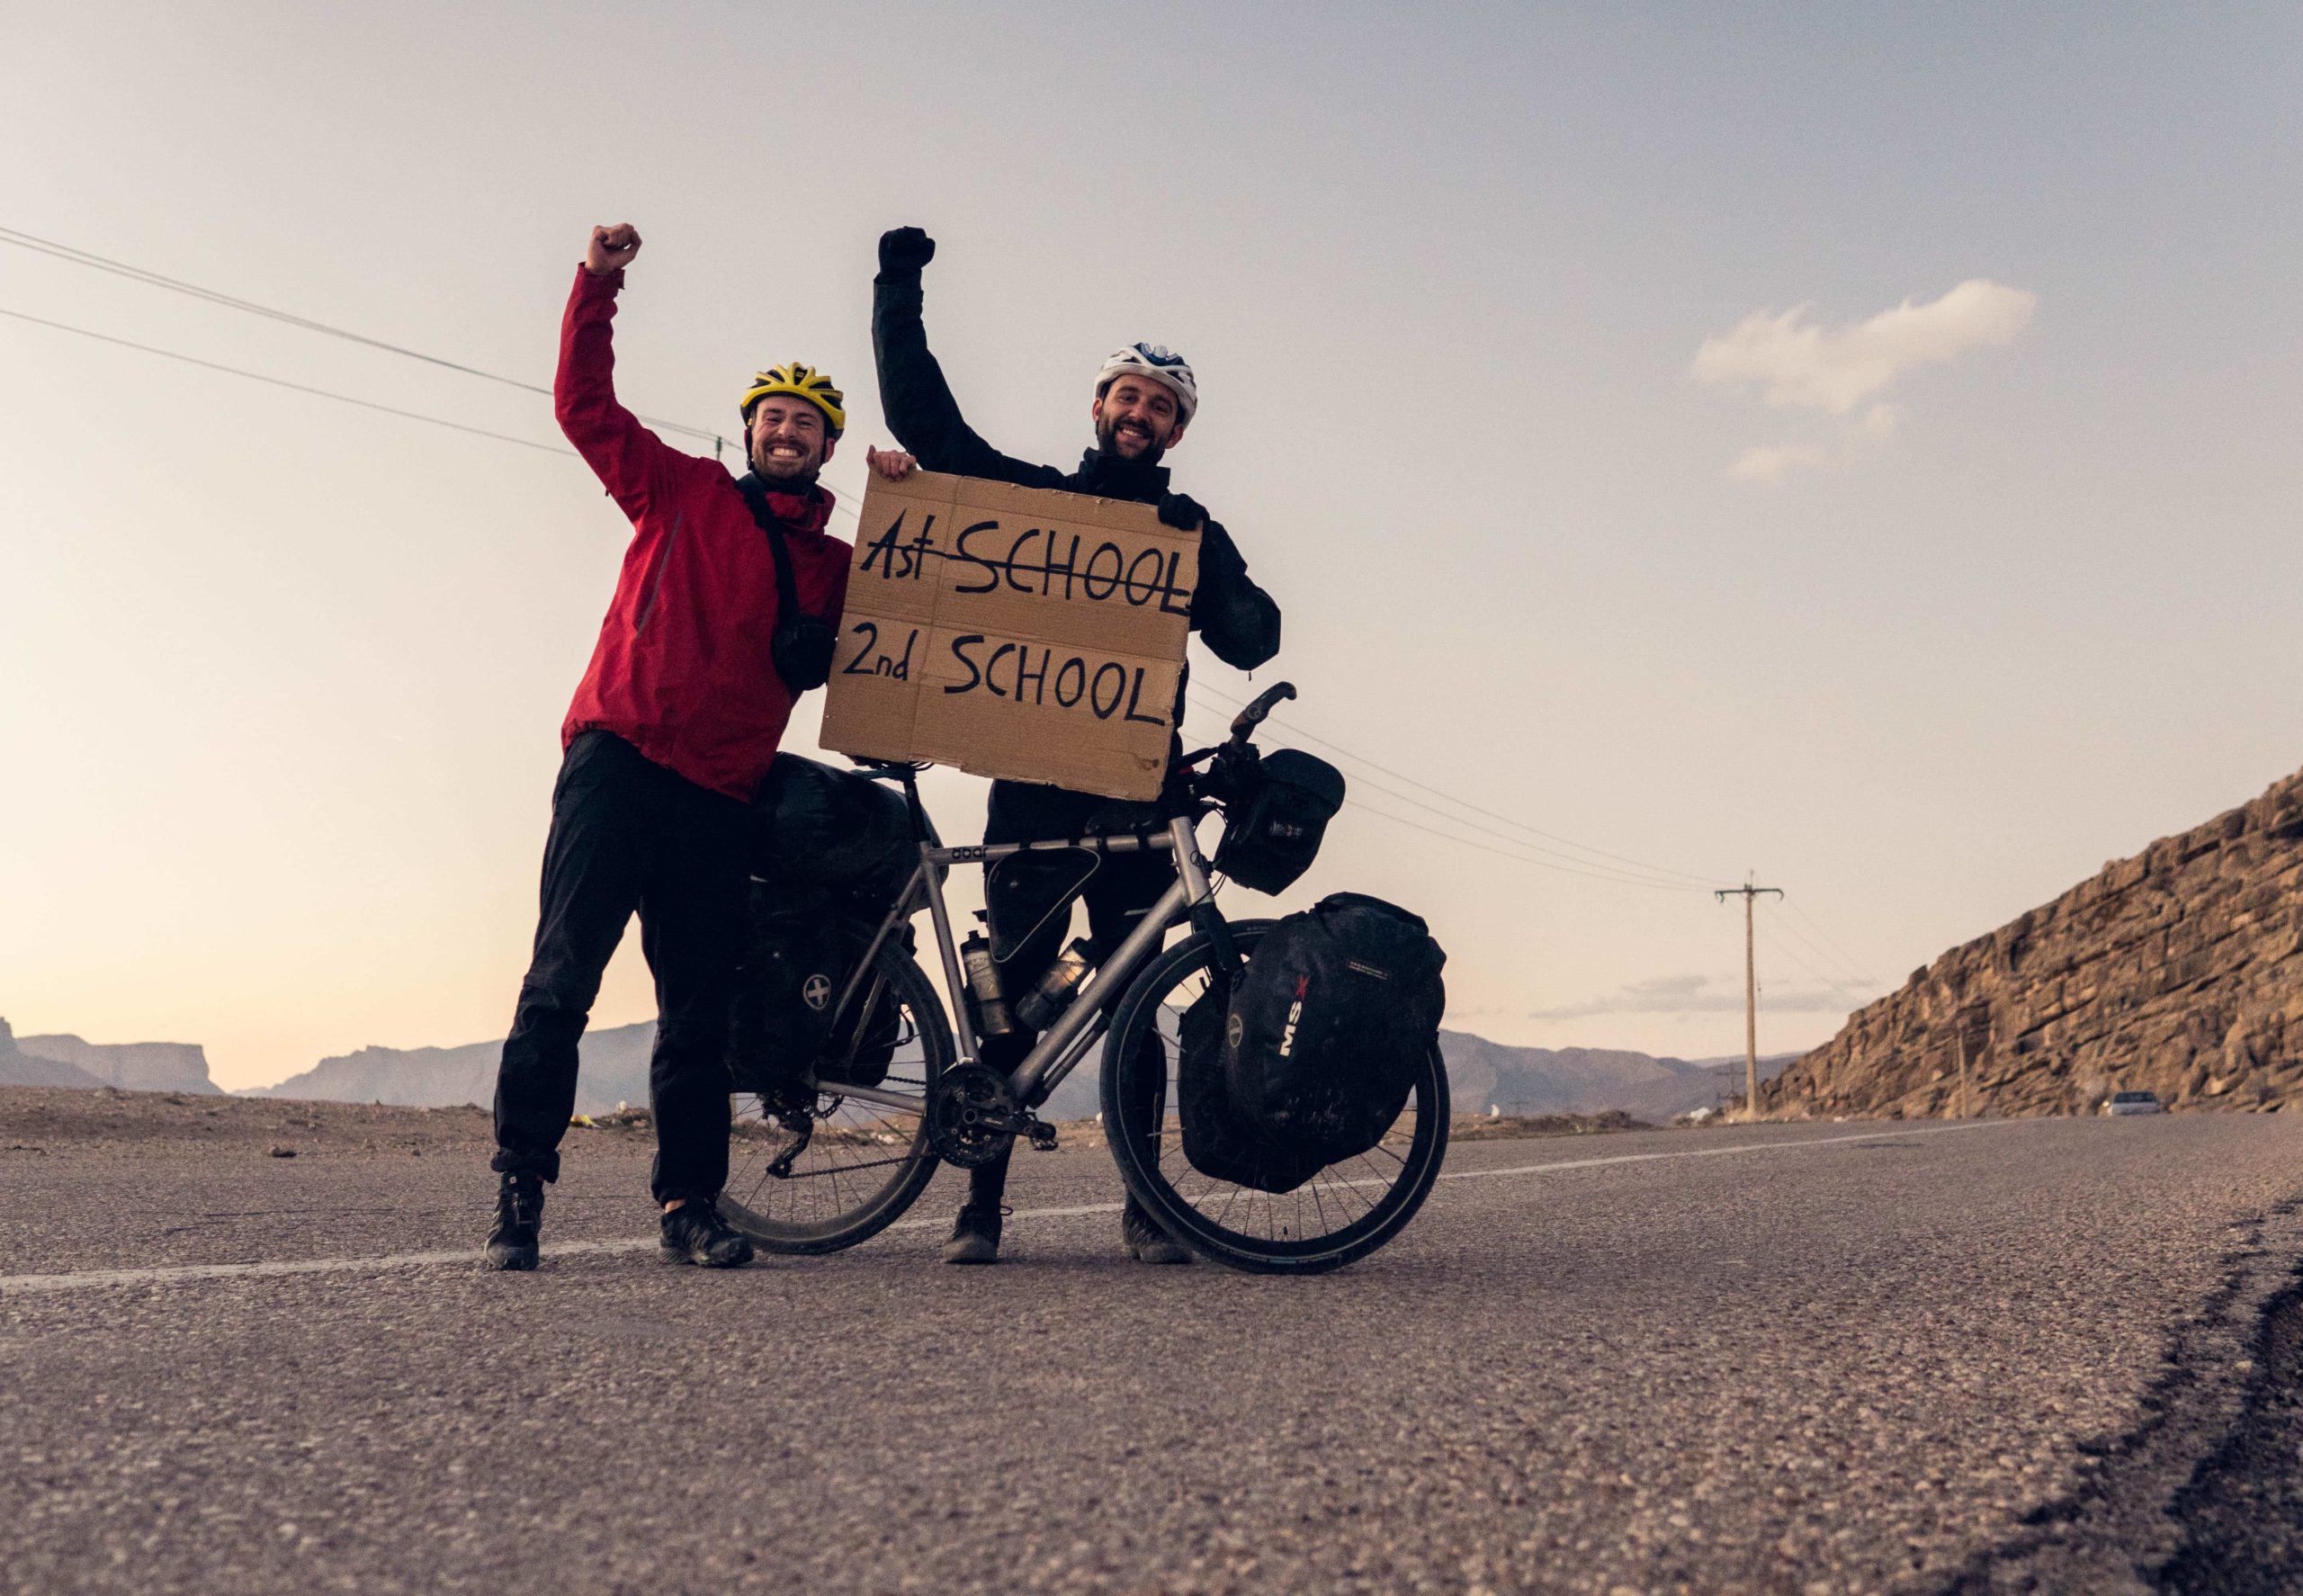 Meet Max and Nono: two friends cycling across 20 countries to support Pencils of Promise students